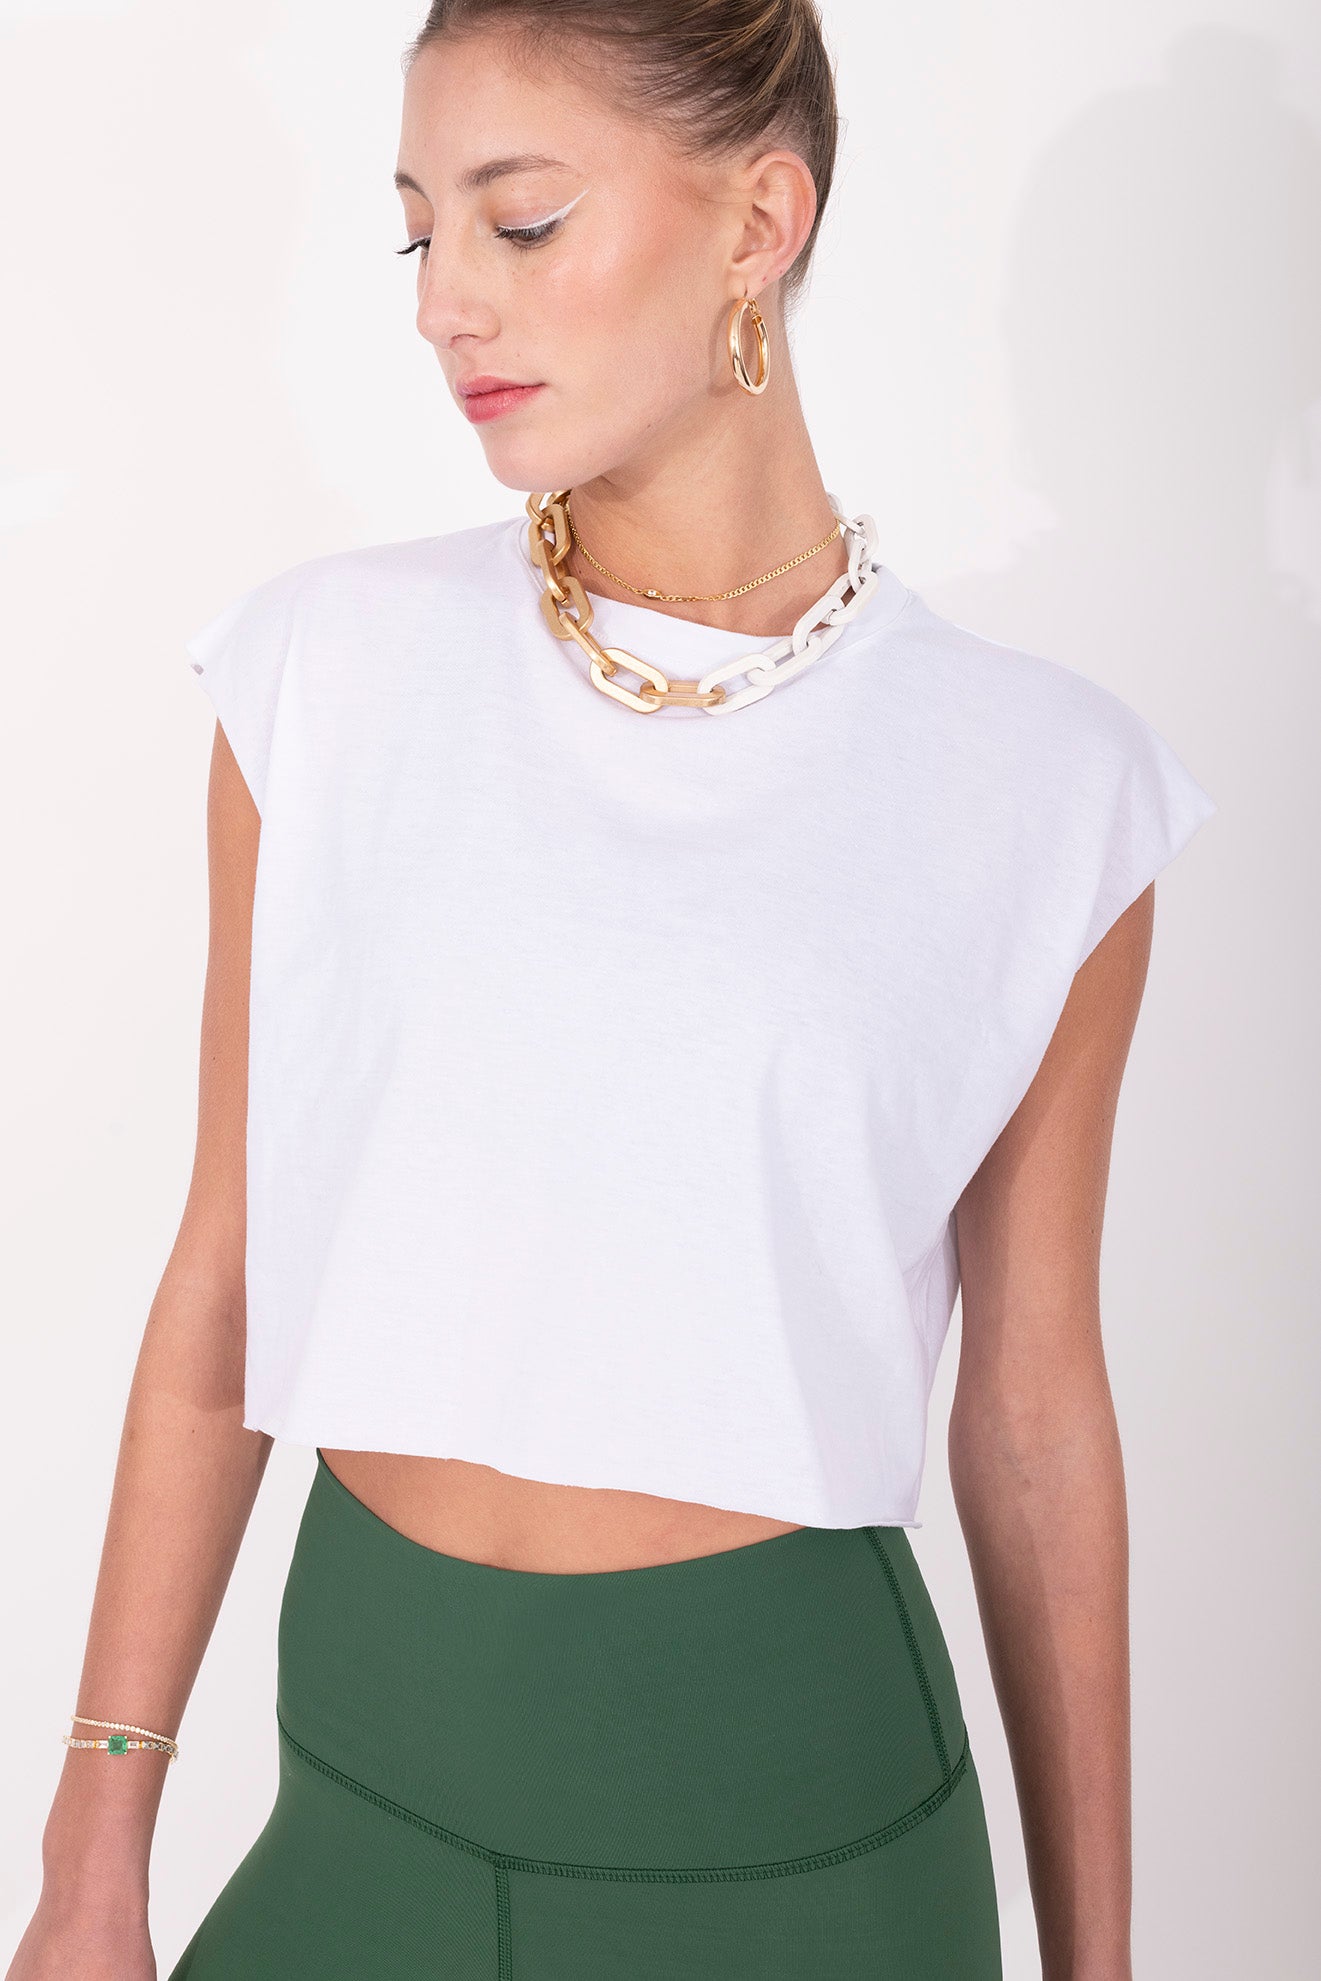 Cropped Low Muscle Tshirt